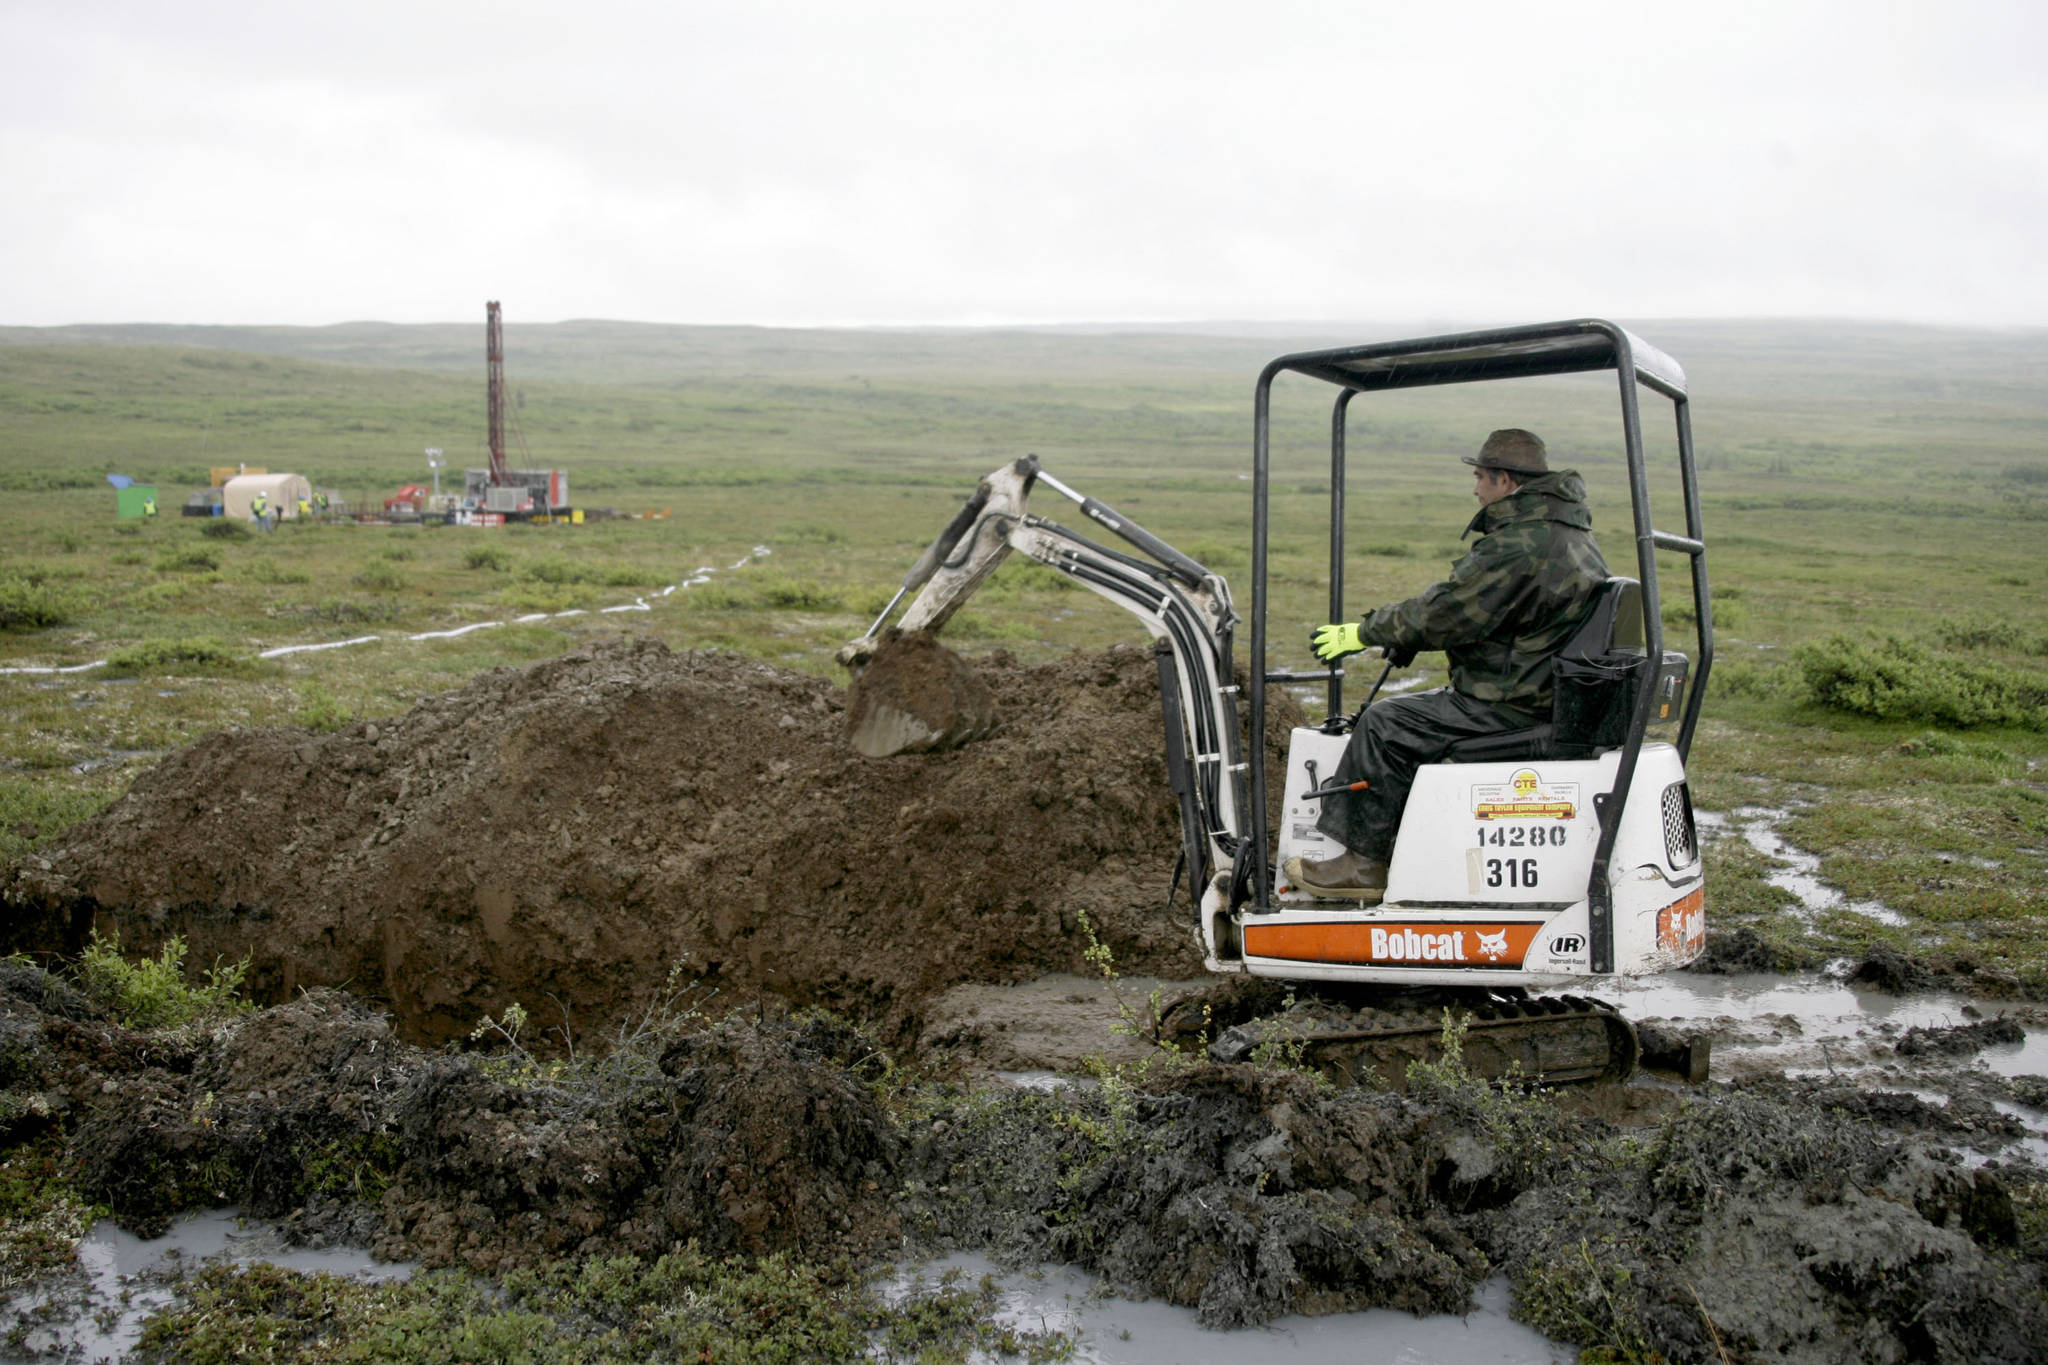 FILE - In this July 13, 2007 file photo, a worker with the Pebble Mine project digs in the Bristol Bay region of Alaska near the village of Iliamma, Alaska. The Trump administration settled a lawsuit Friday, May 12, 2017, over the proposed development of a massive copper and gold deposit near the headwaters of a world-premier salmon fishery in southwest Alaska. (AP Photo/Al Grillo,File)